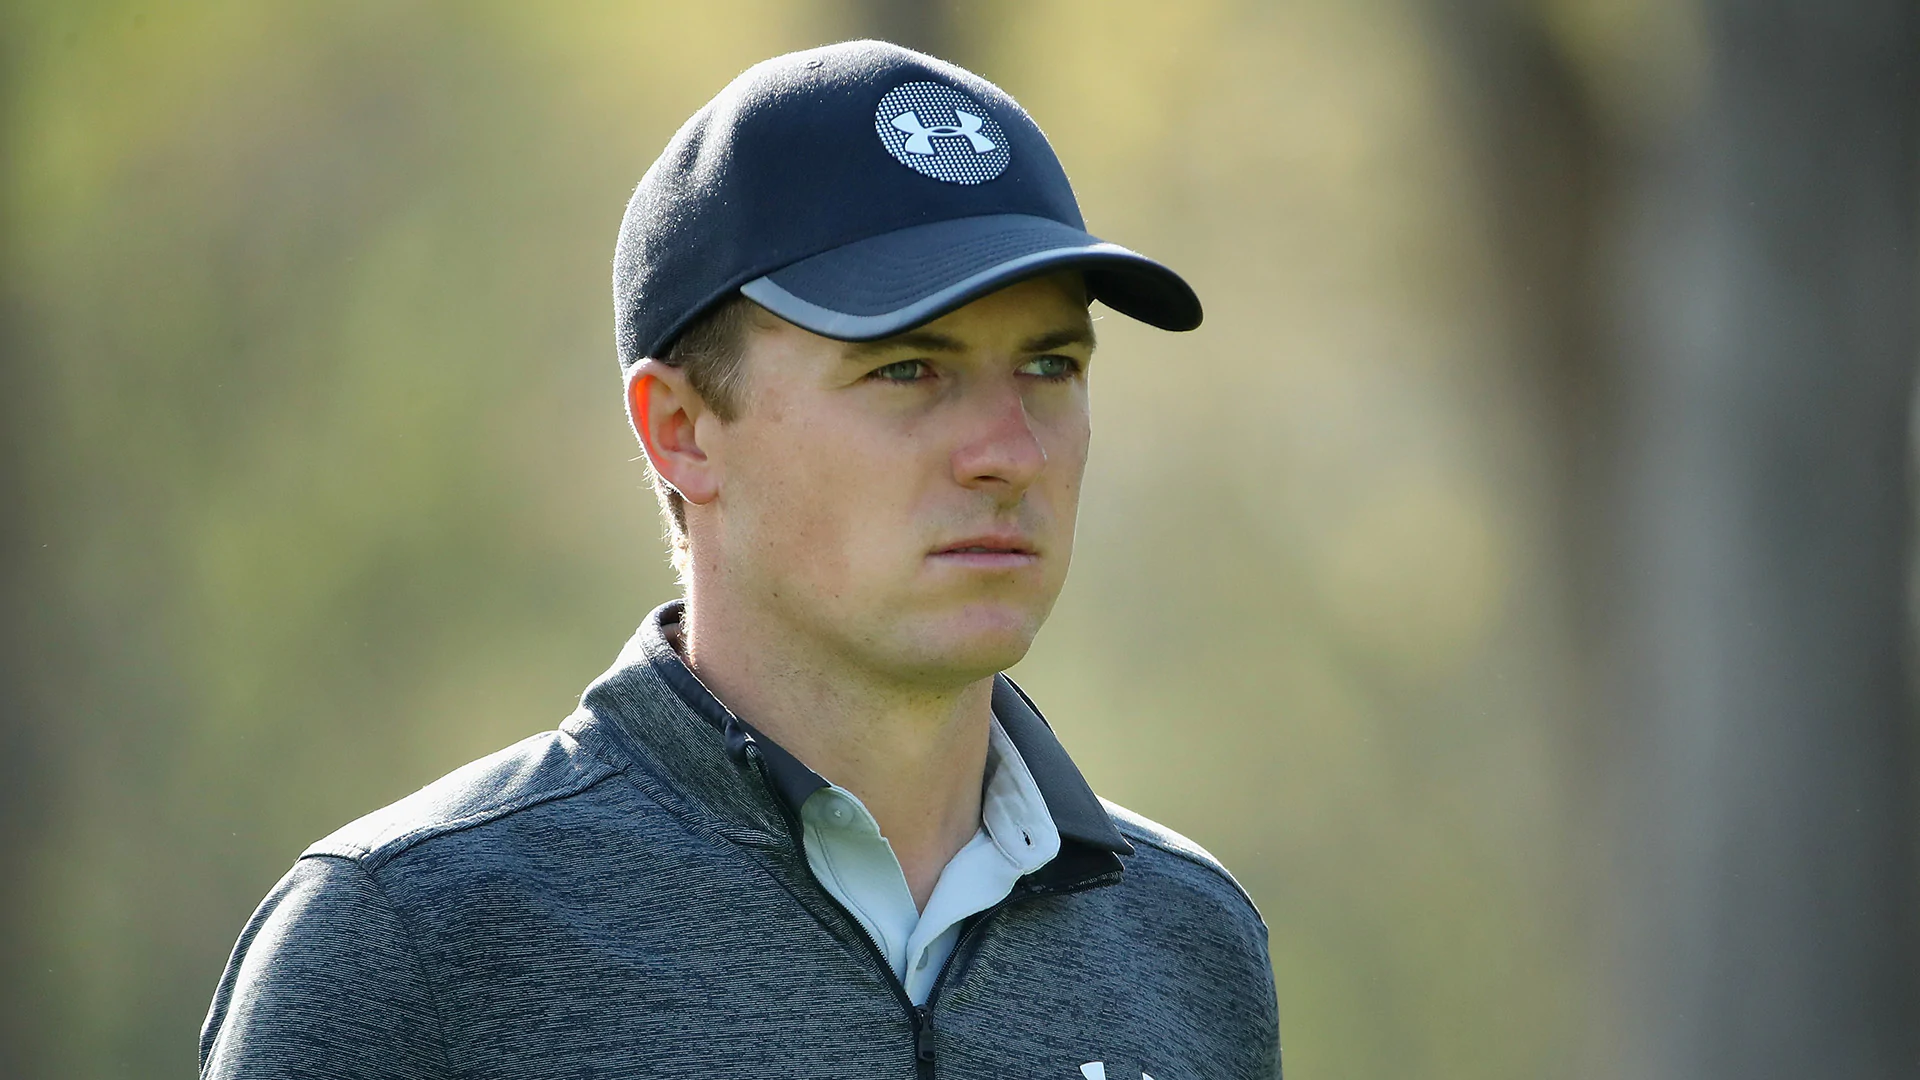 Spieth not even thinking Grand Slam after Friday 66